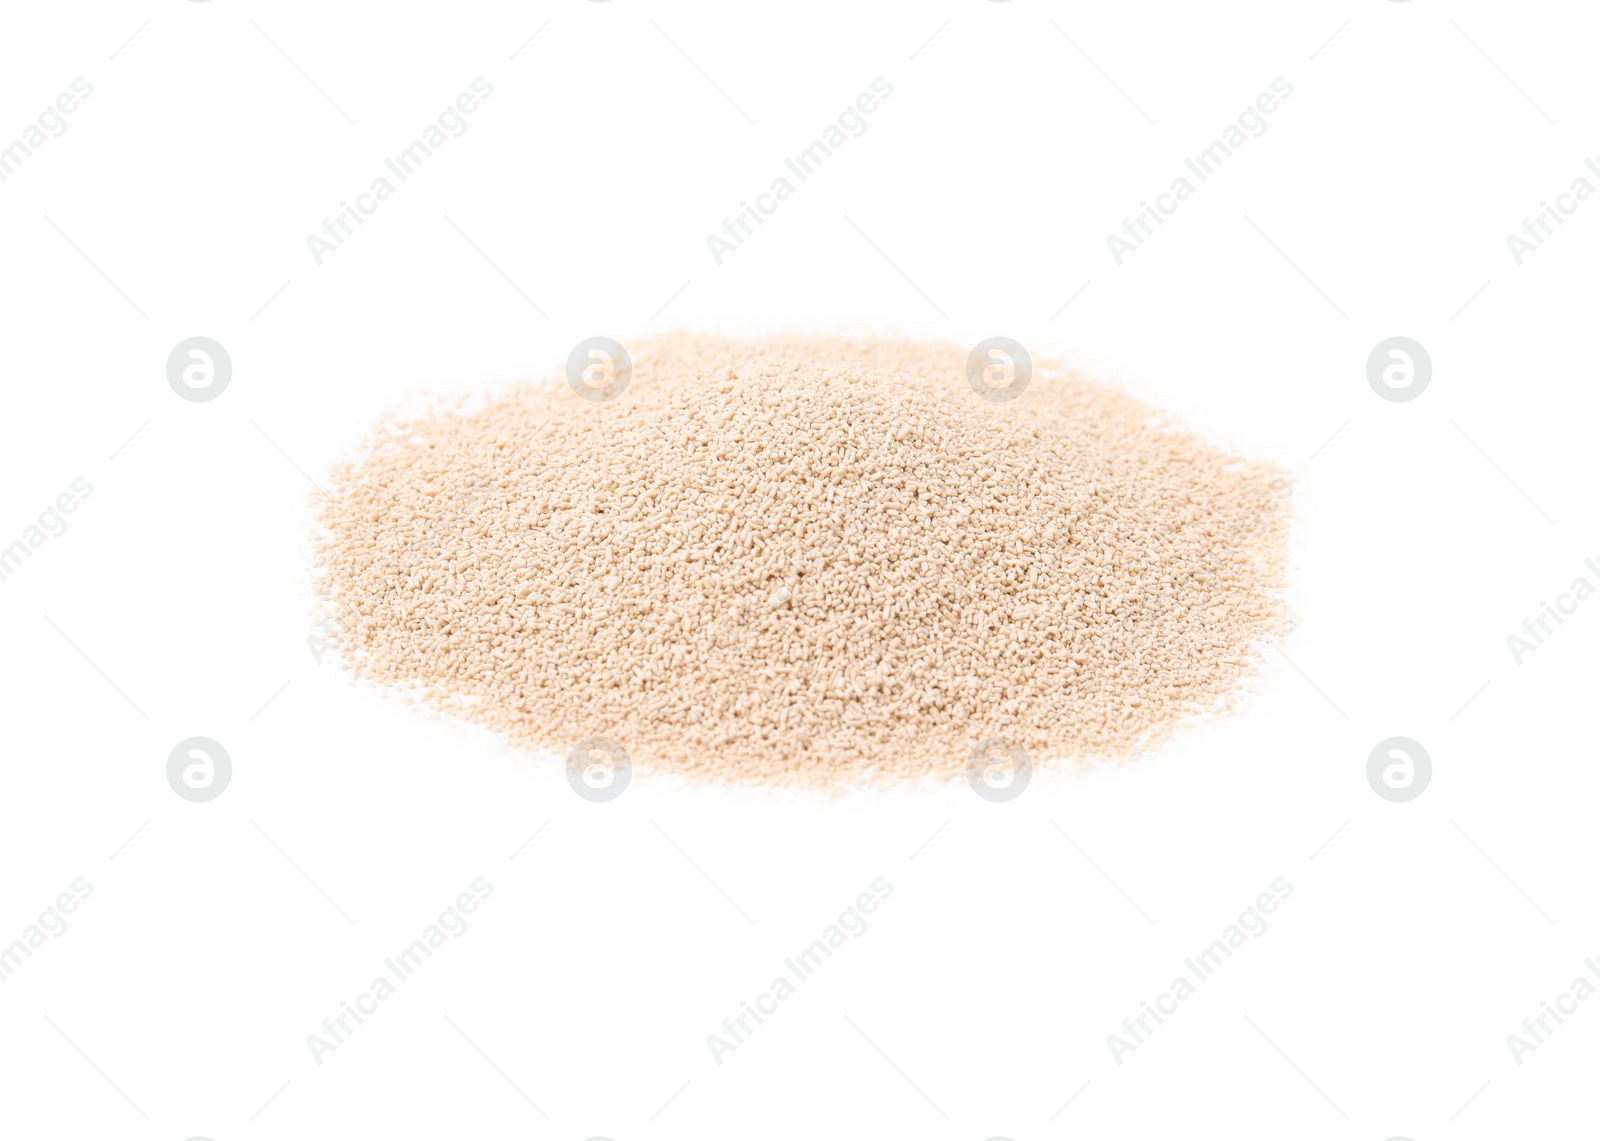 Photo of Pile of granulated yeast isolated on white